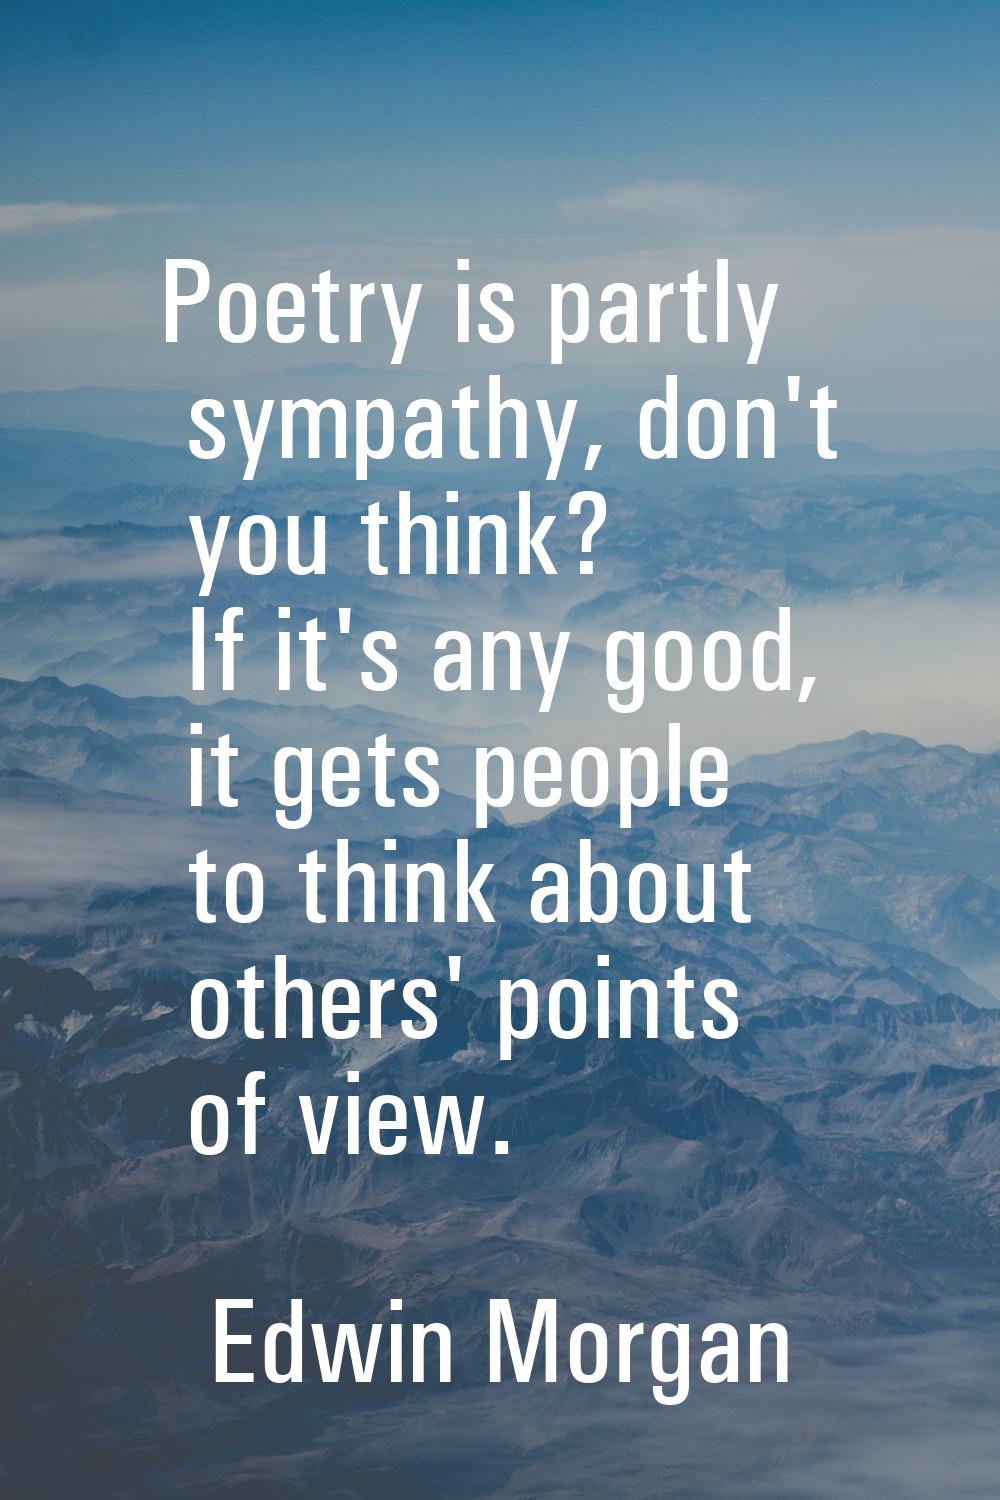 Poetry is partly sympathy, don't you think? If it's any good, it gets people to think about others'